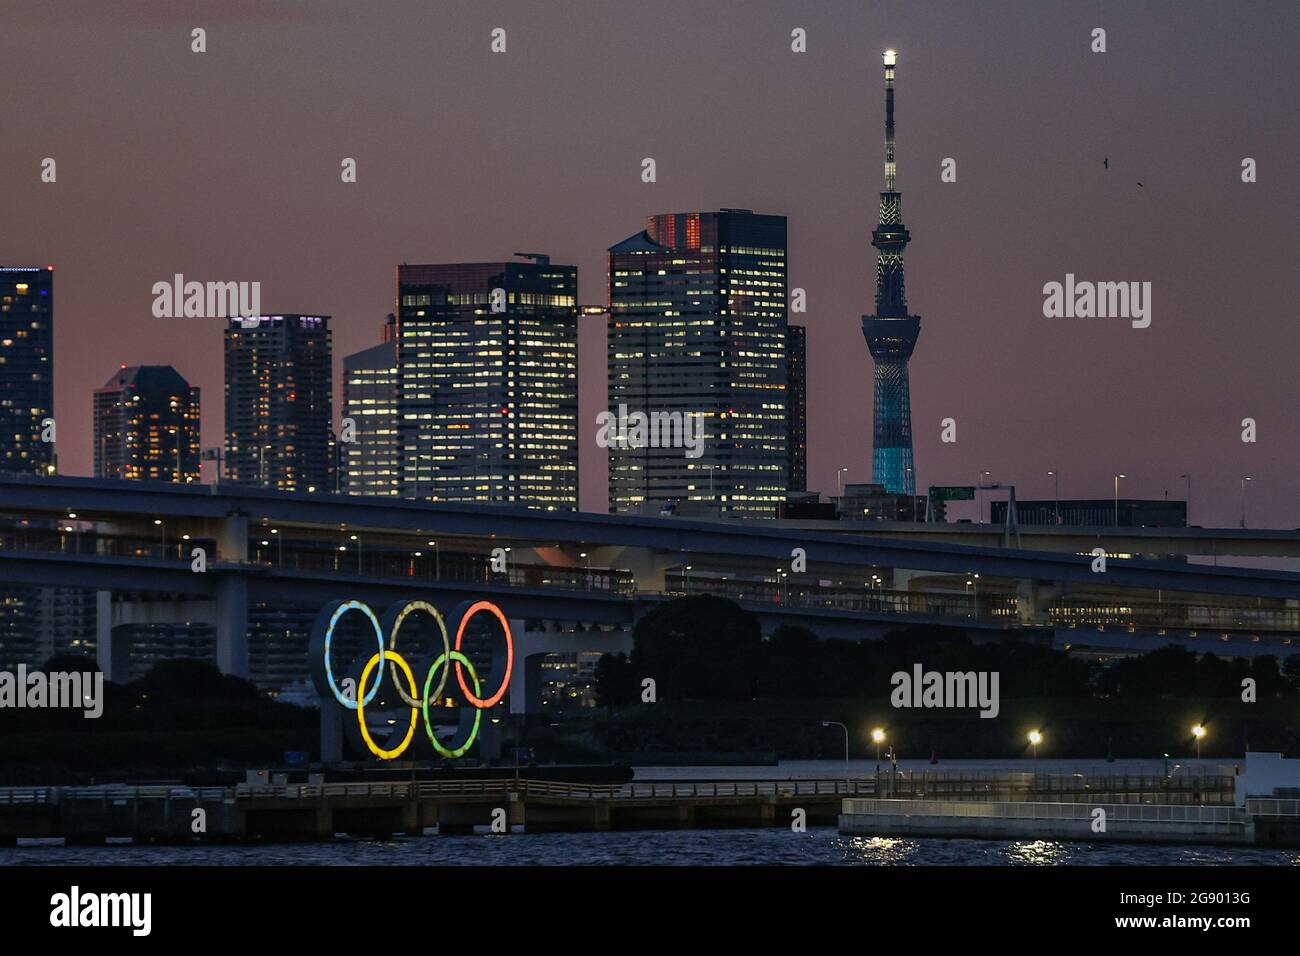 16th July 2021 - A large monument of the Olympic rings is displayed before the Tokyo 2020 Olympic Games in Tokyo, Japan Stock Photo